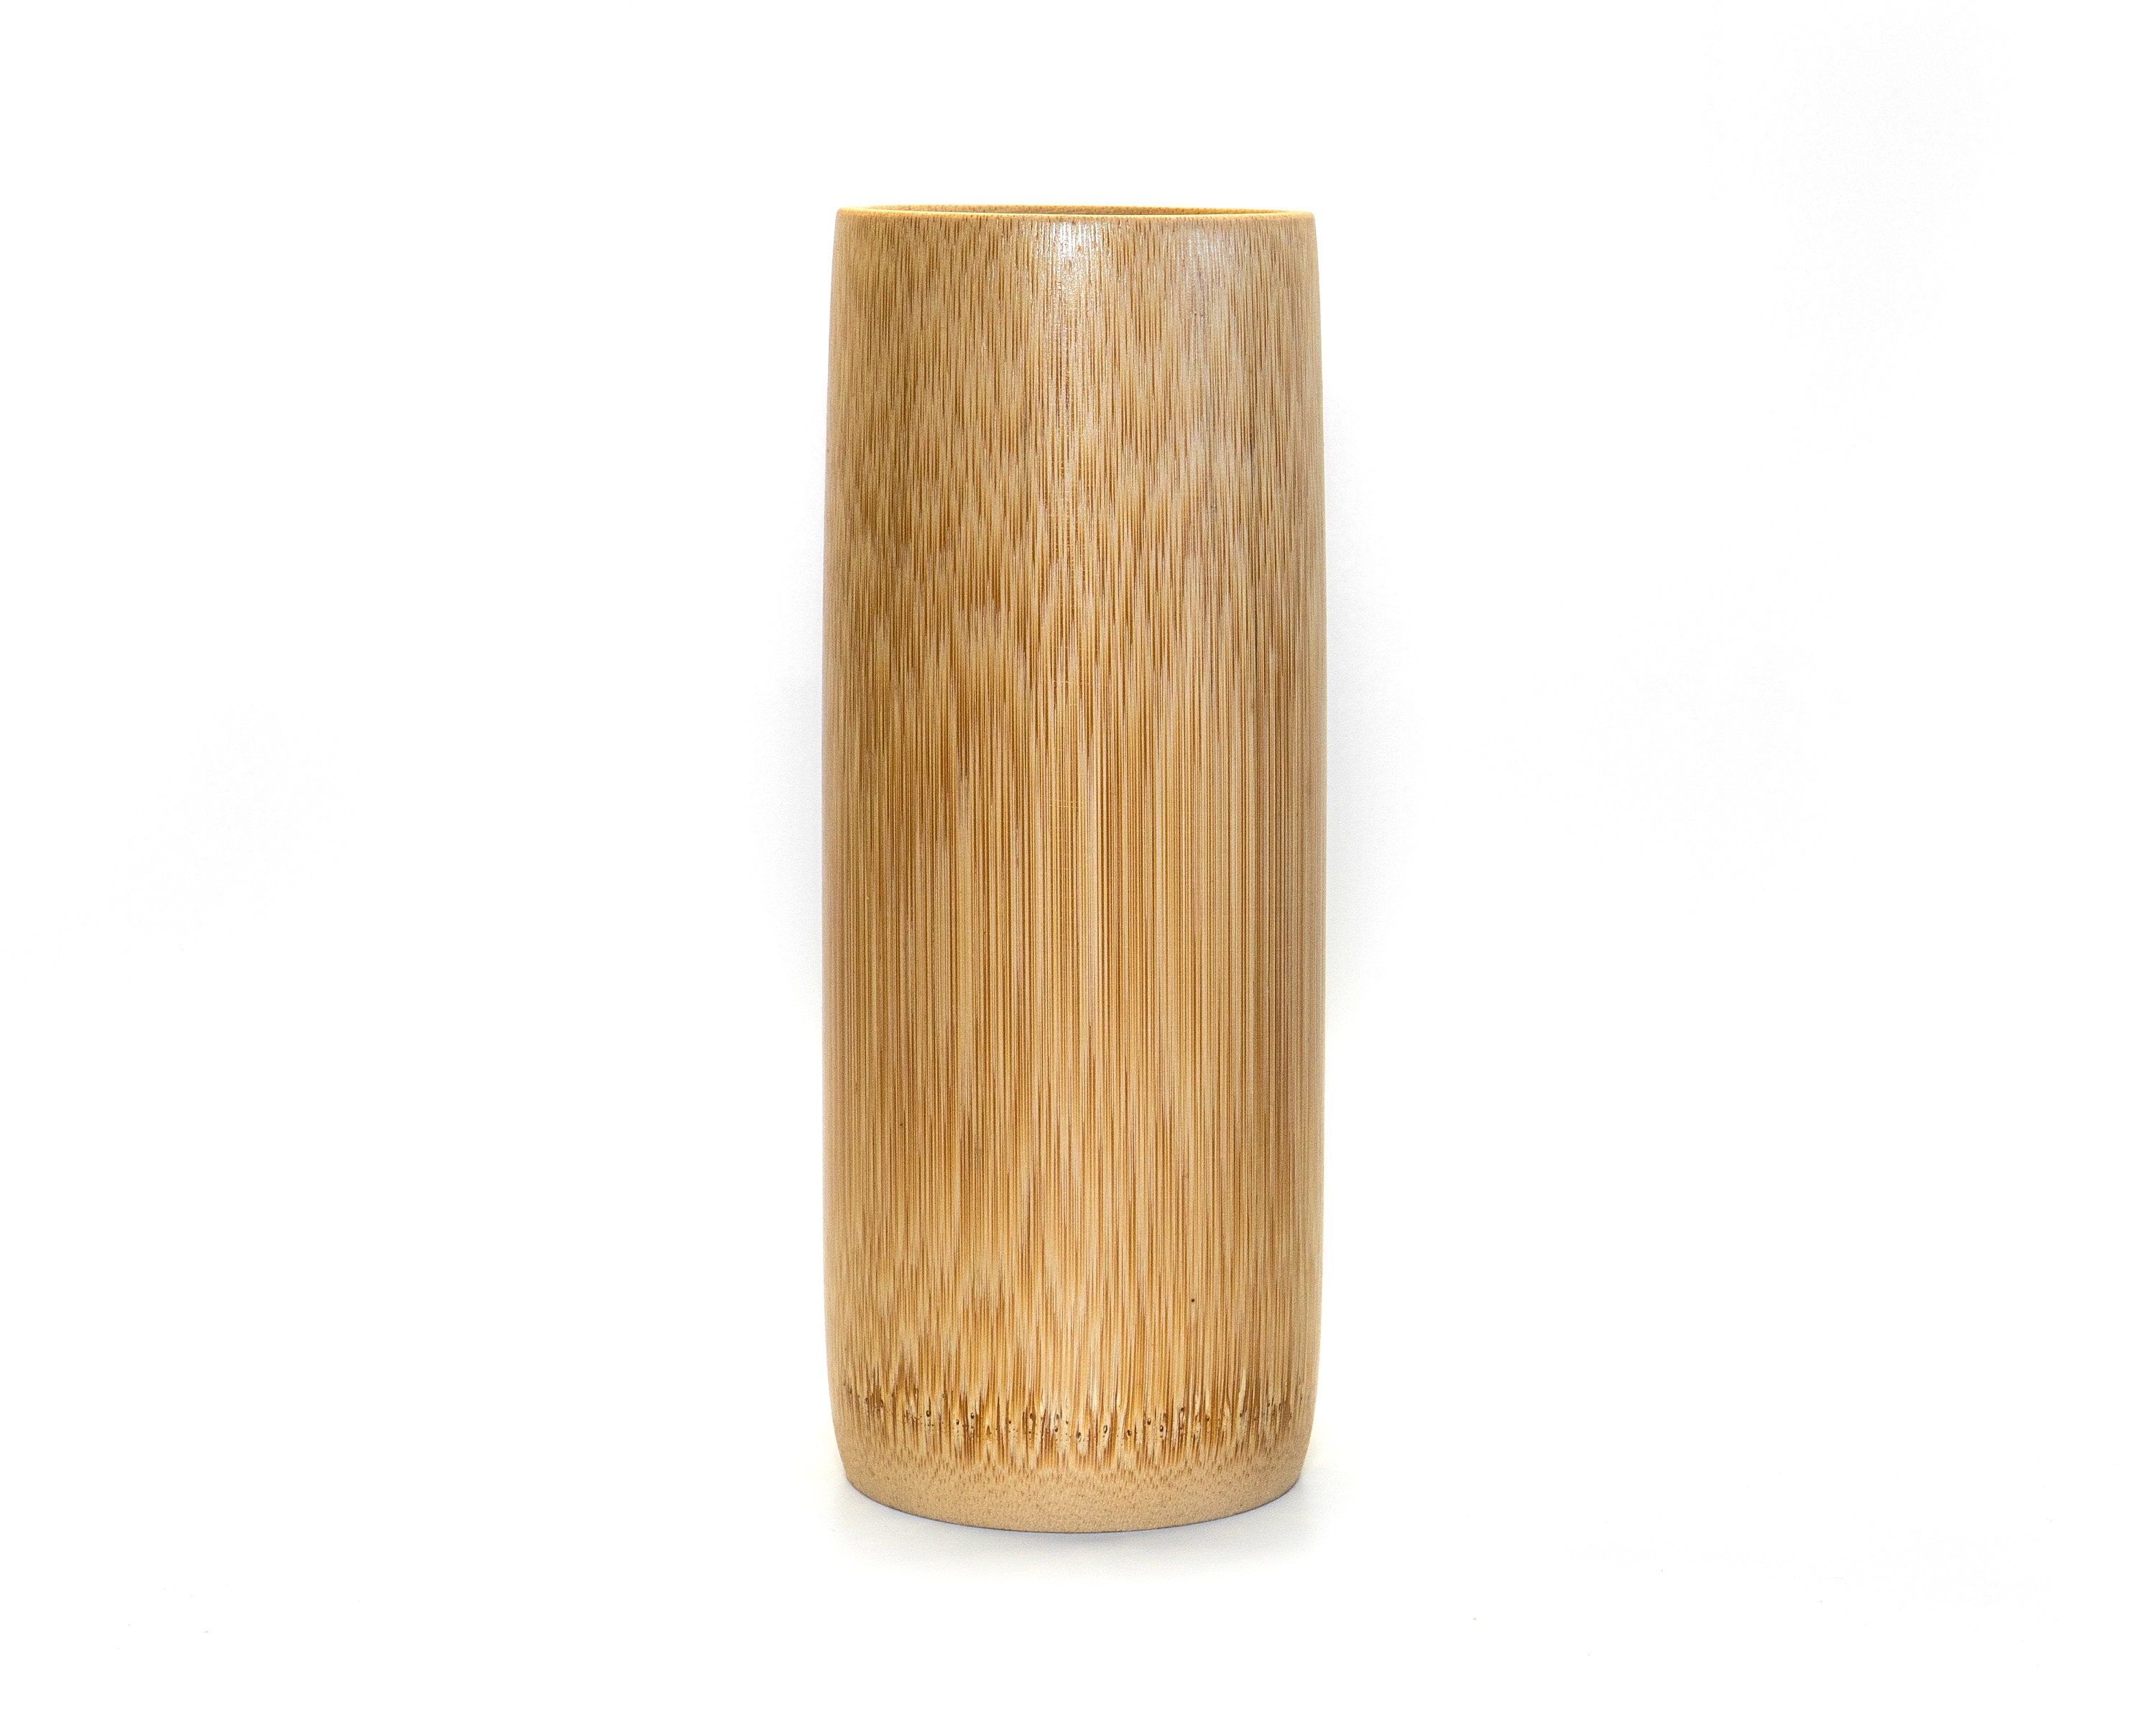 JUNGLE CULTURE BAMBOO TALL CUPS/VASE (HOLDS 17 OZ) - SMOOTHIES